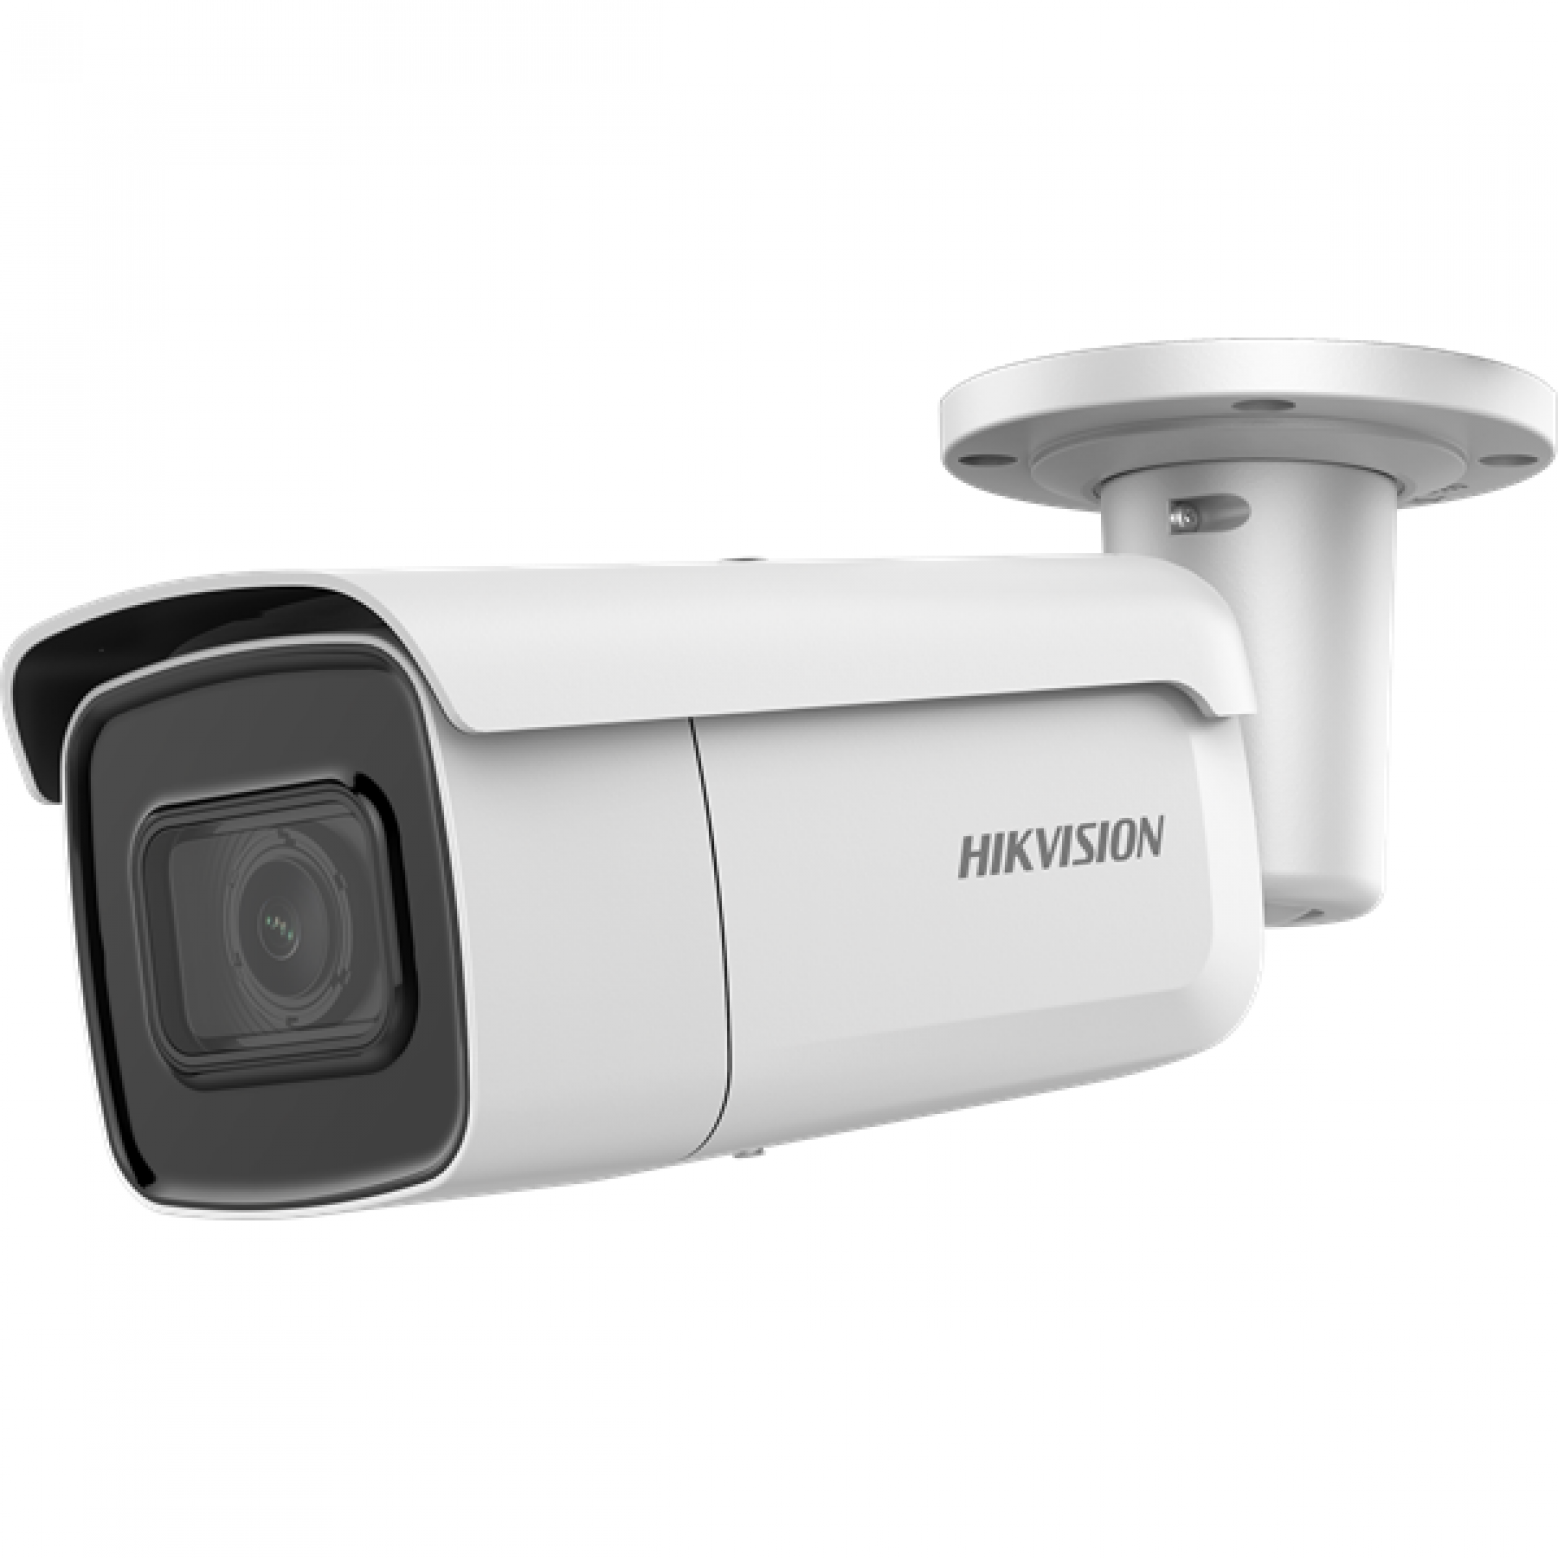 Hikvision DS-2CD2T46G1-4I, AcuSense, 4MP, D/N, IR, WDR 3-Axis, Bullet